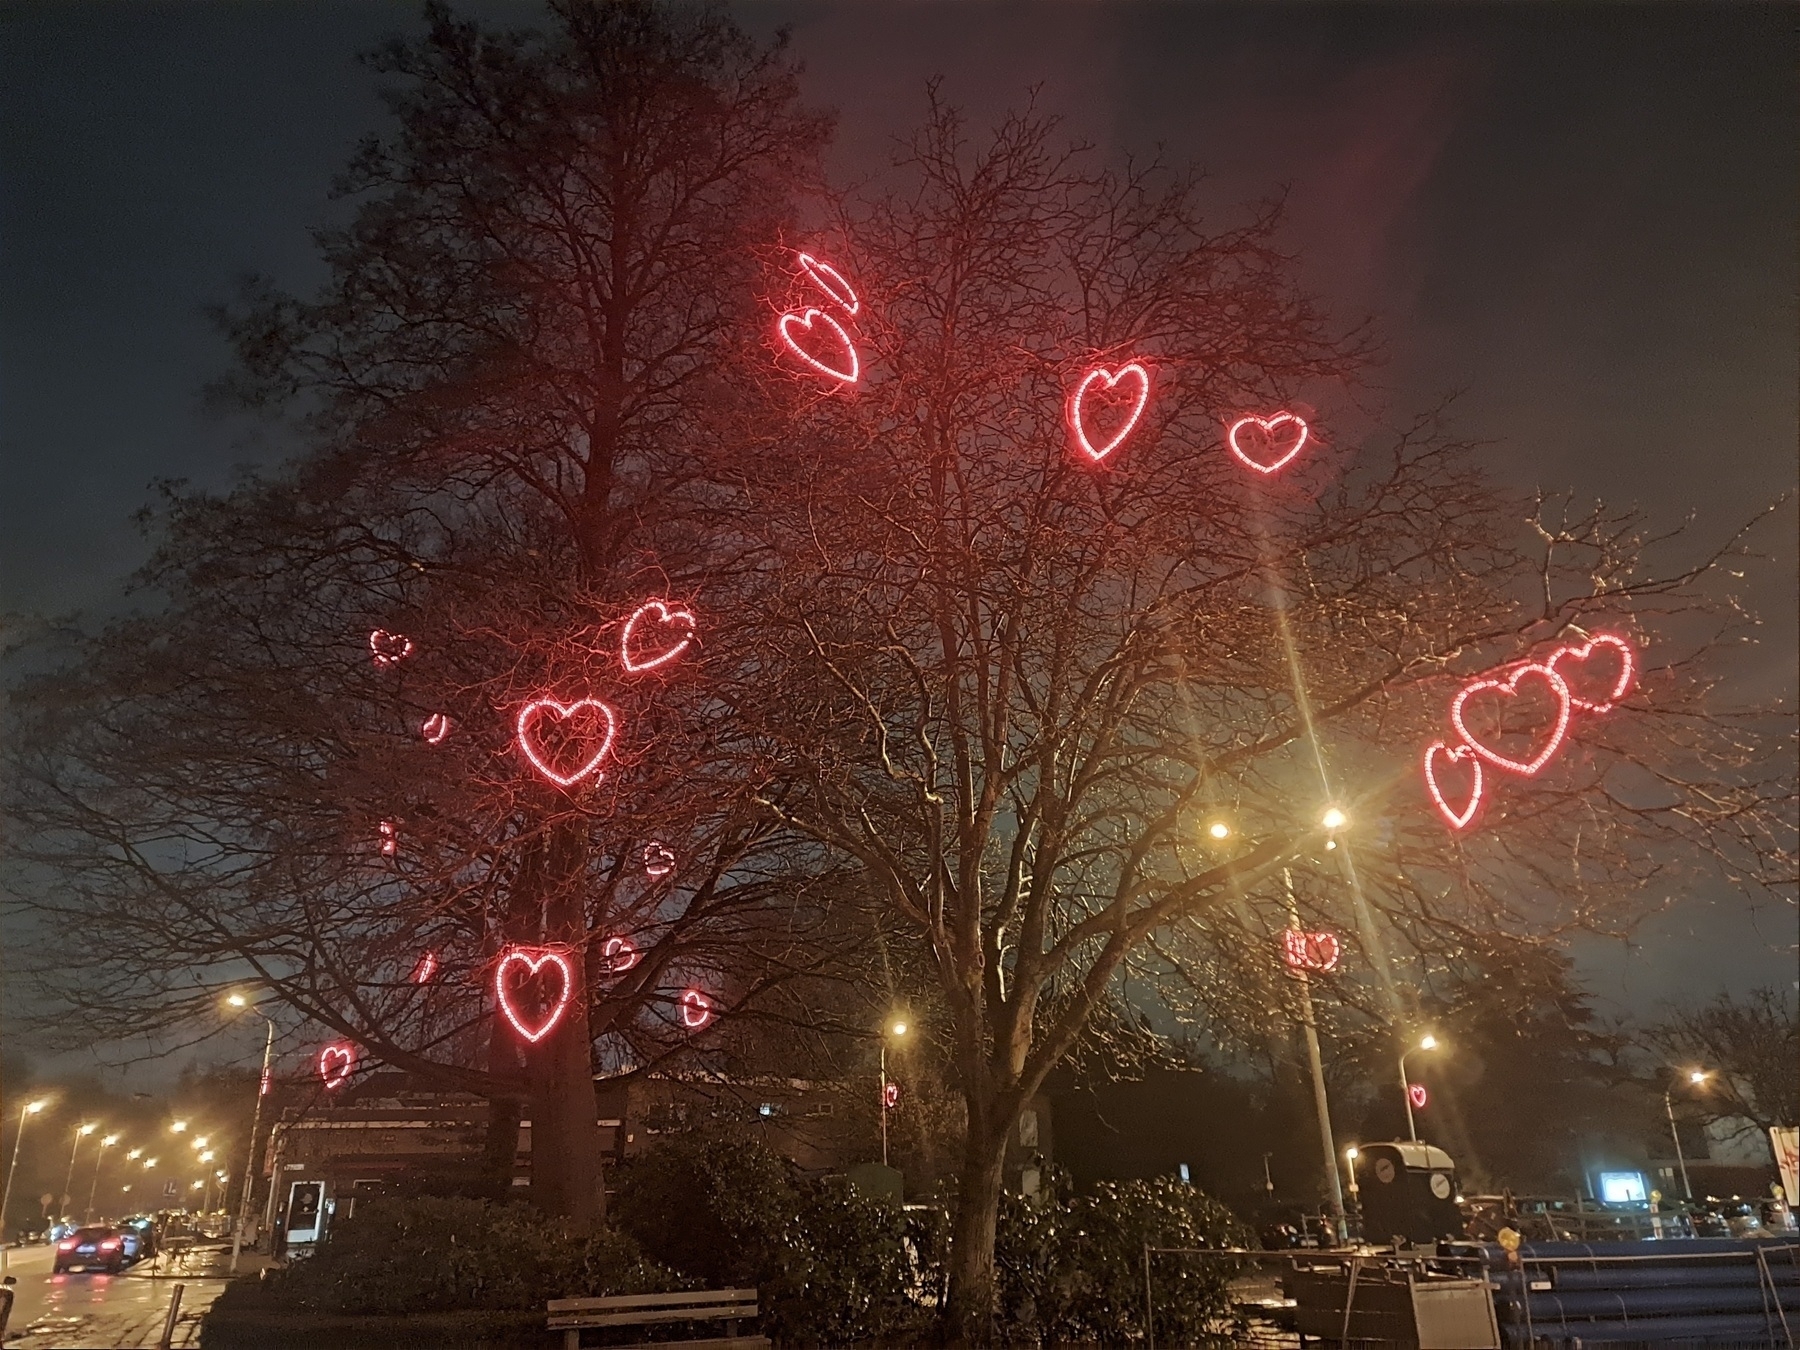 A tree with red lights shaped as a heart in it at a rainy evening